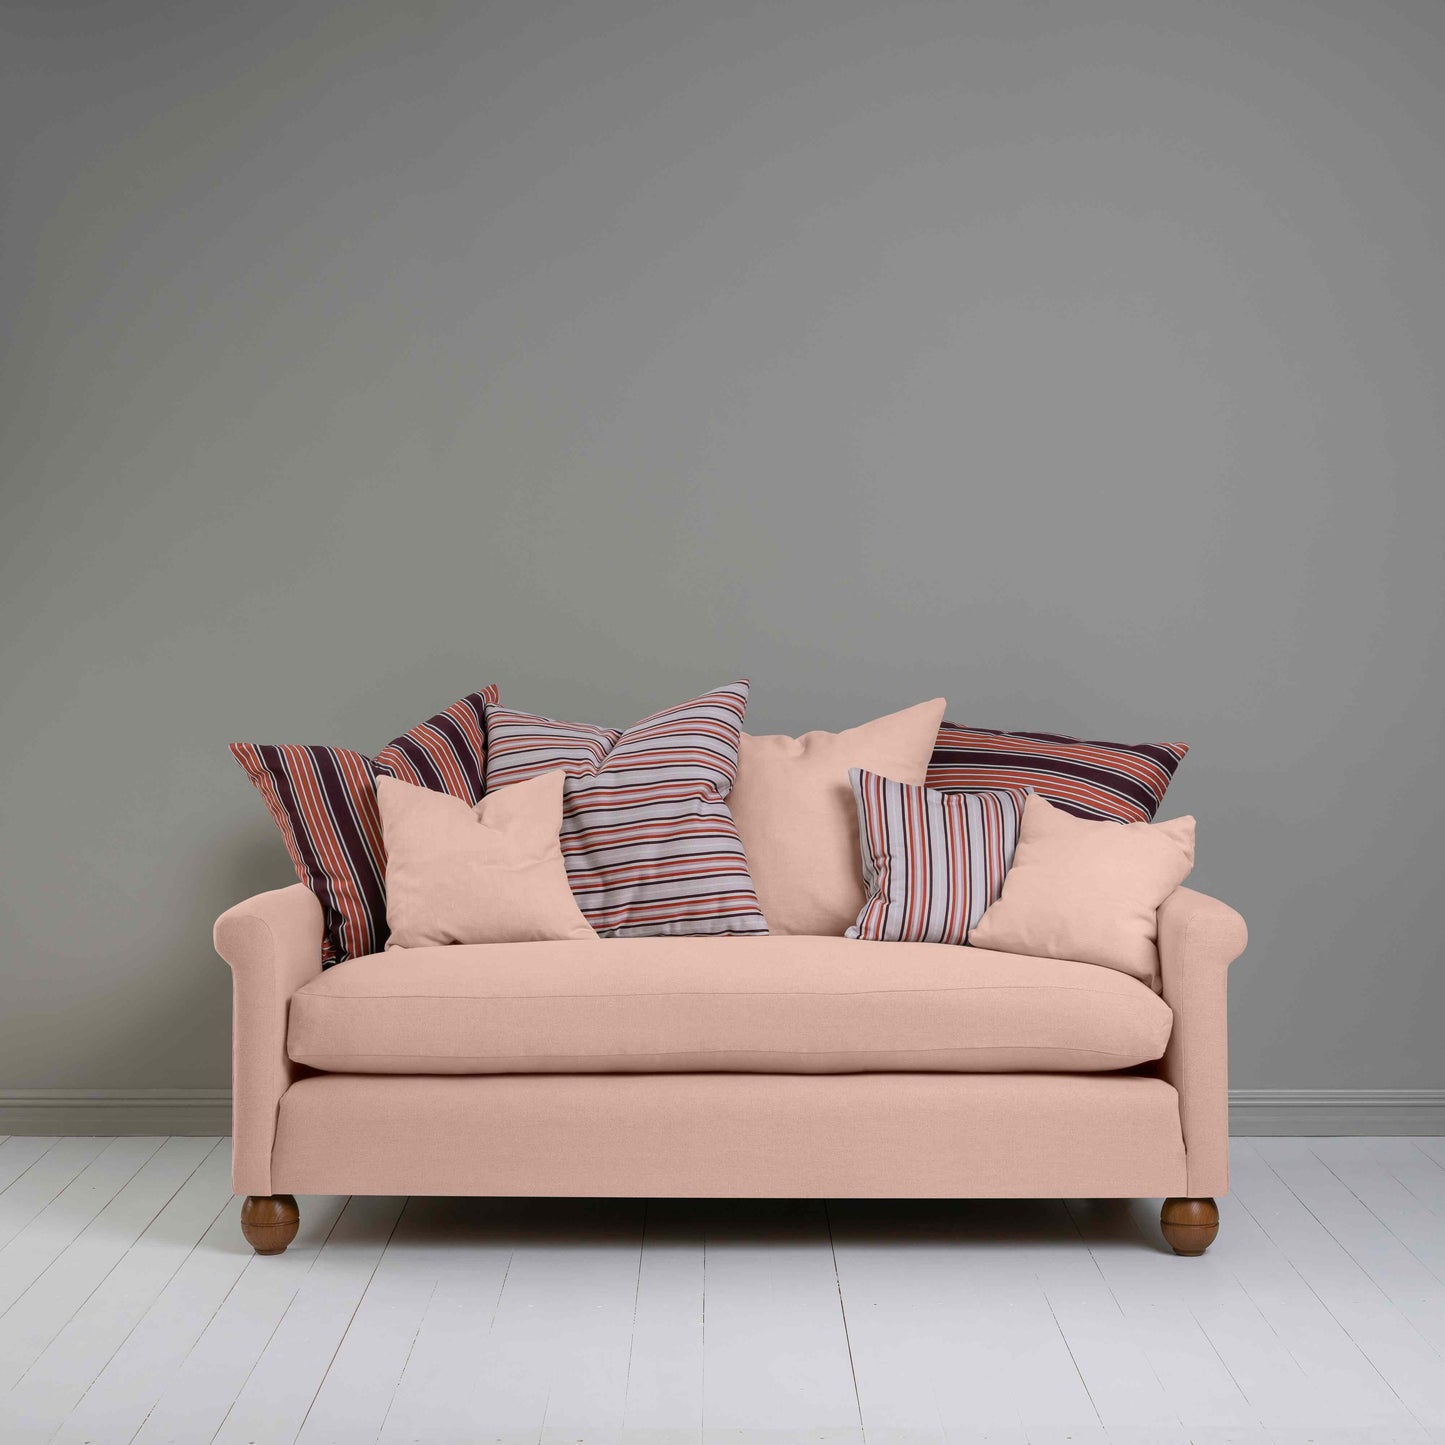 Idler 3 Seater Sofa in Laidback Linen Dusky Pink